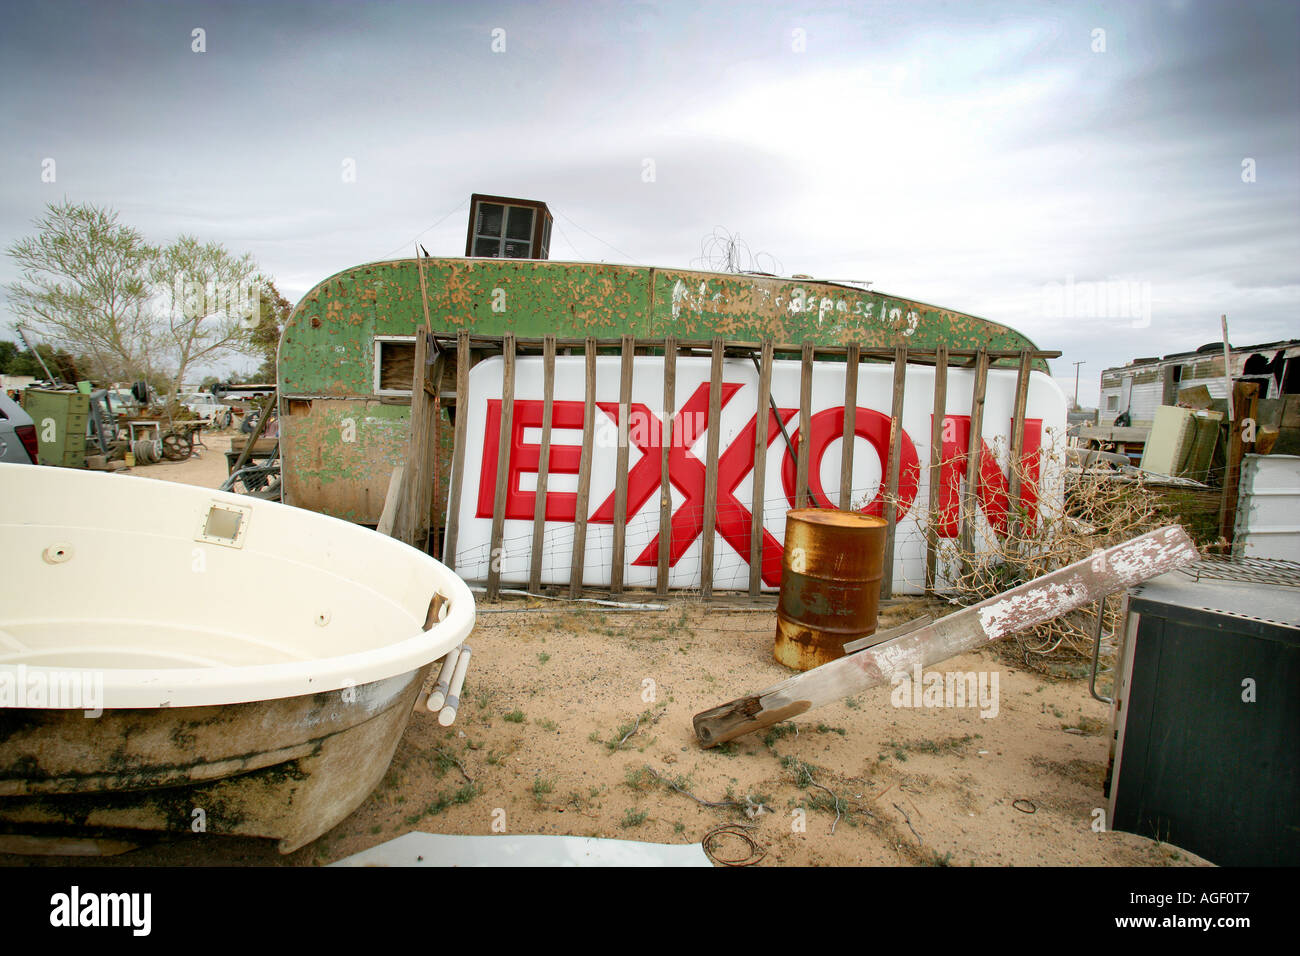 A junk yard in the Nevada Desert USA with scrap American cars and an old trailer big Exxon plastic sign Stock Photo